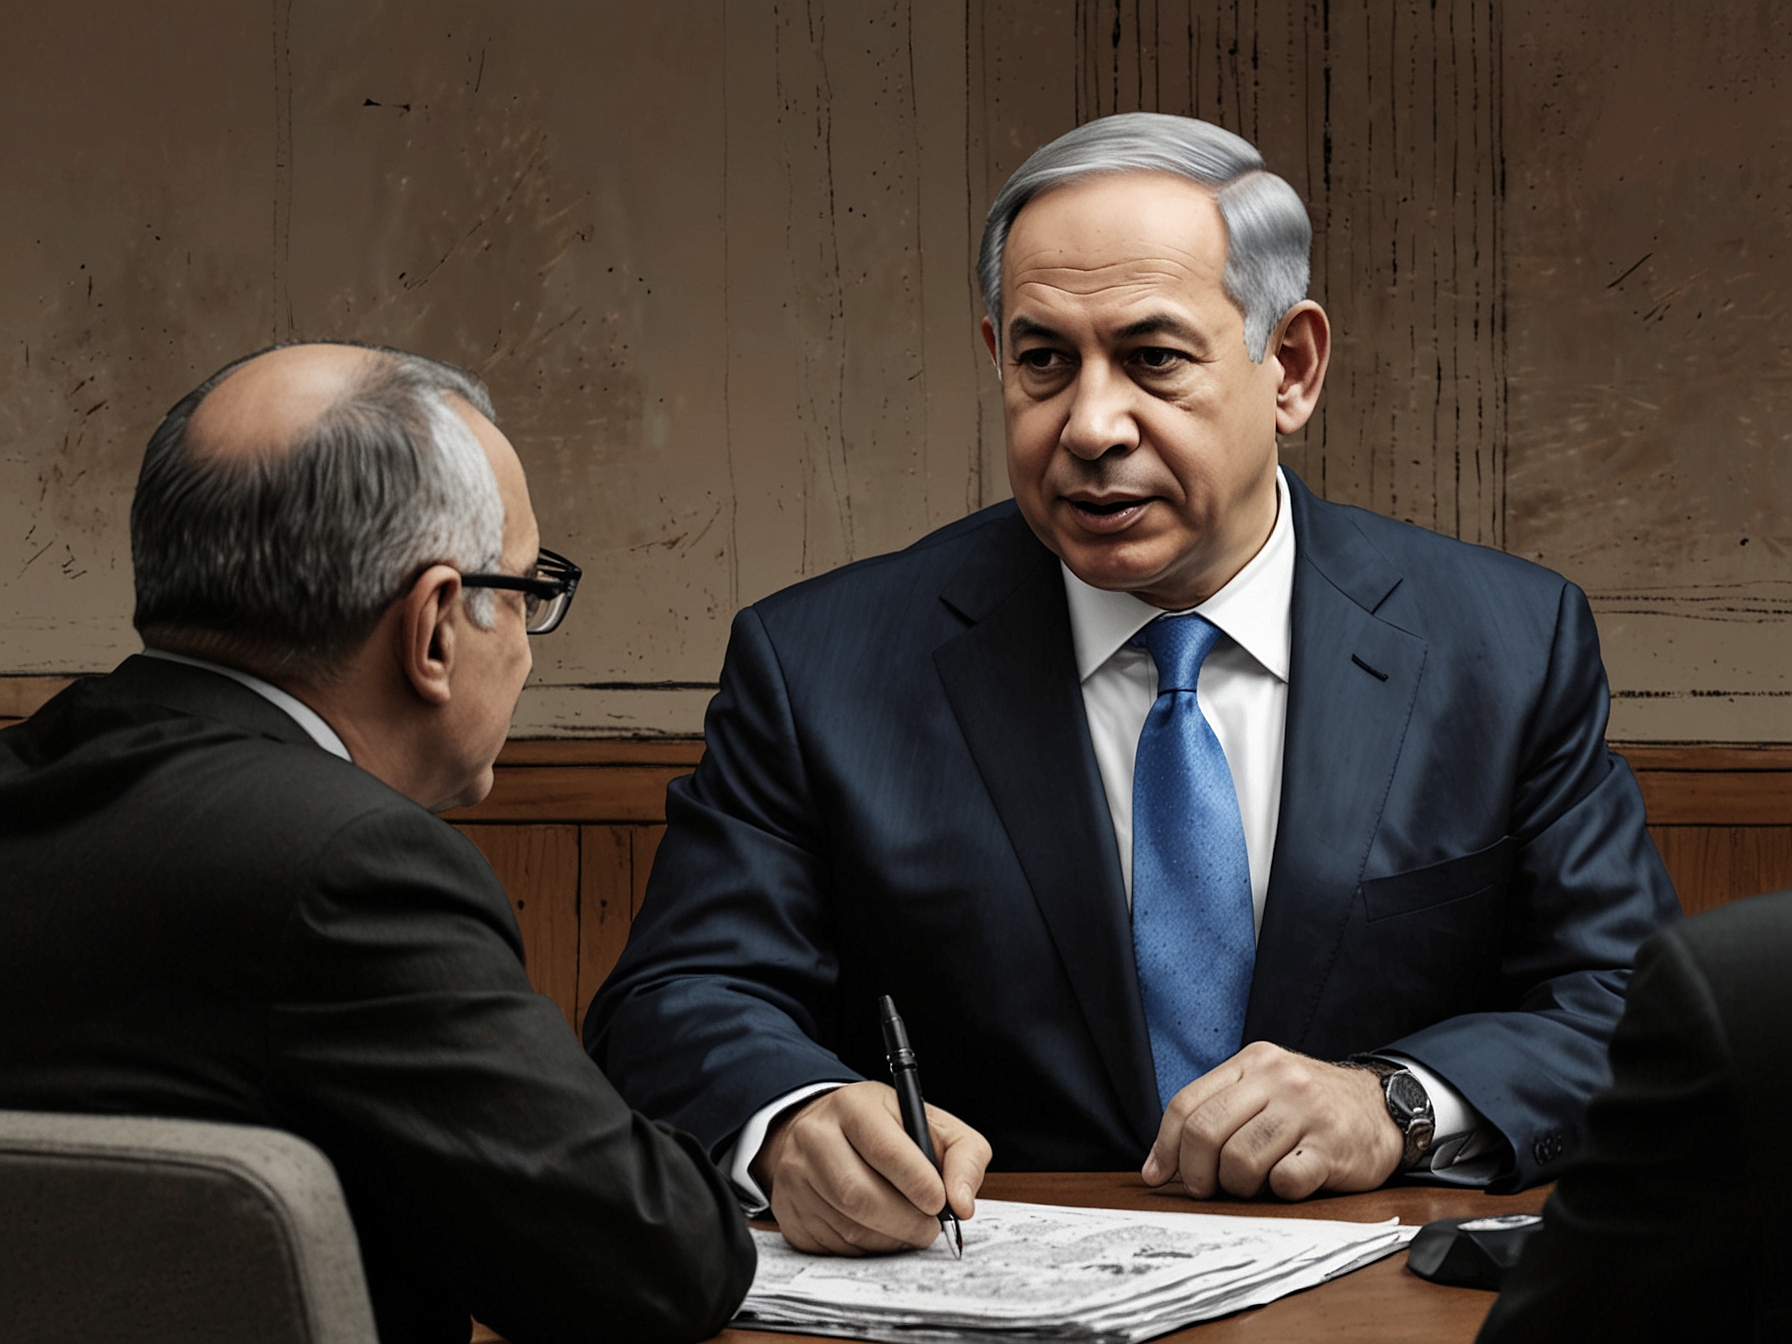 Israeli Prime Minister Benjamin Netanyahu speaking during a TV interview, addressing the current state of the Gaza conflict and hinting at future military strategies.